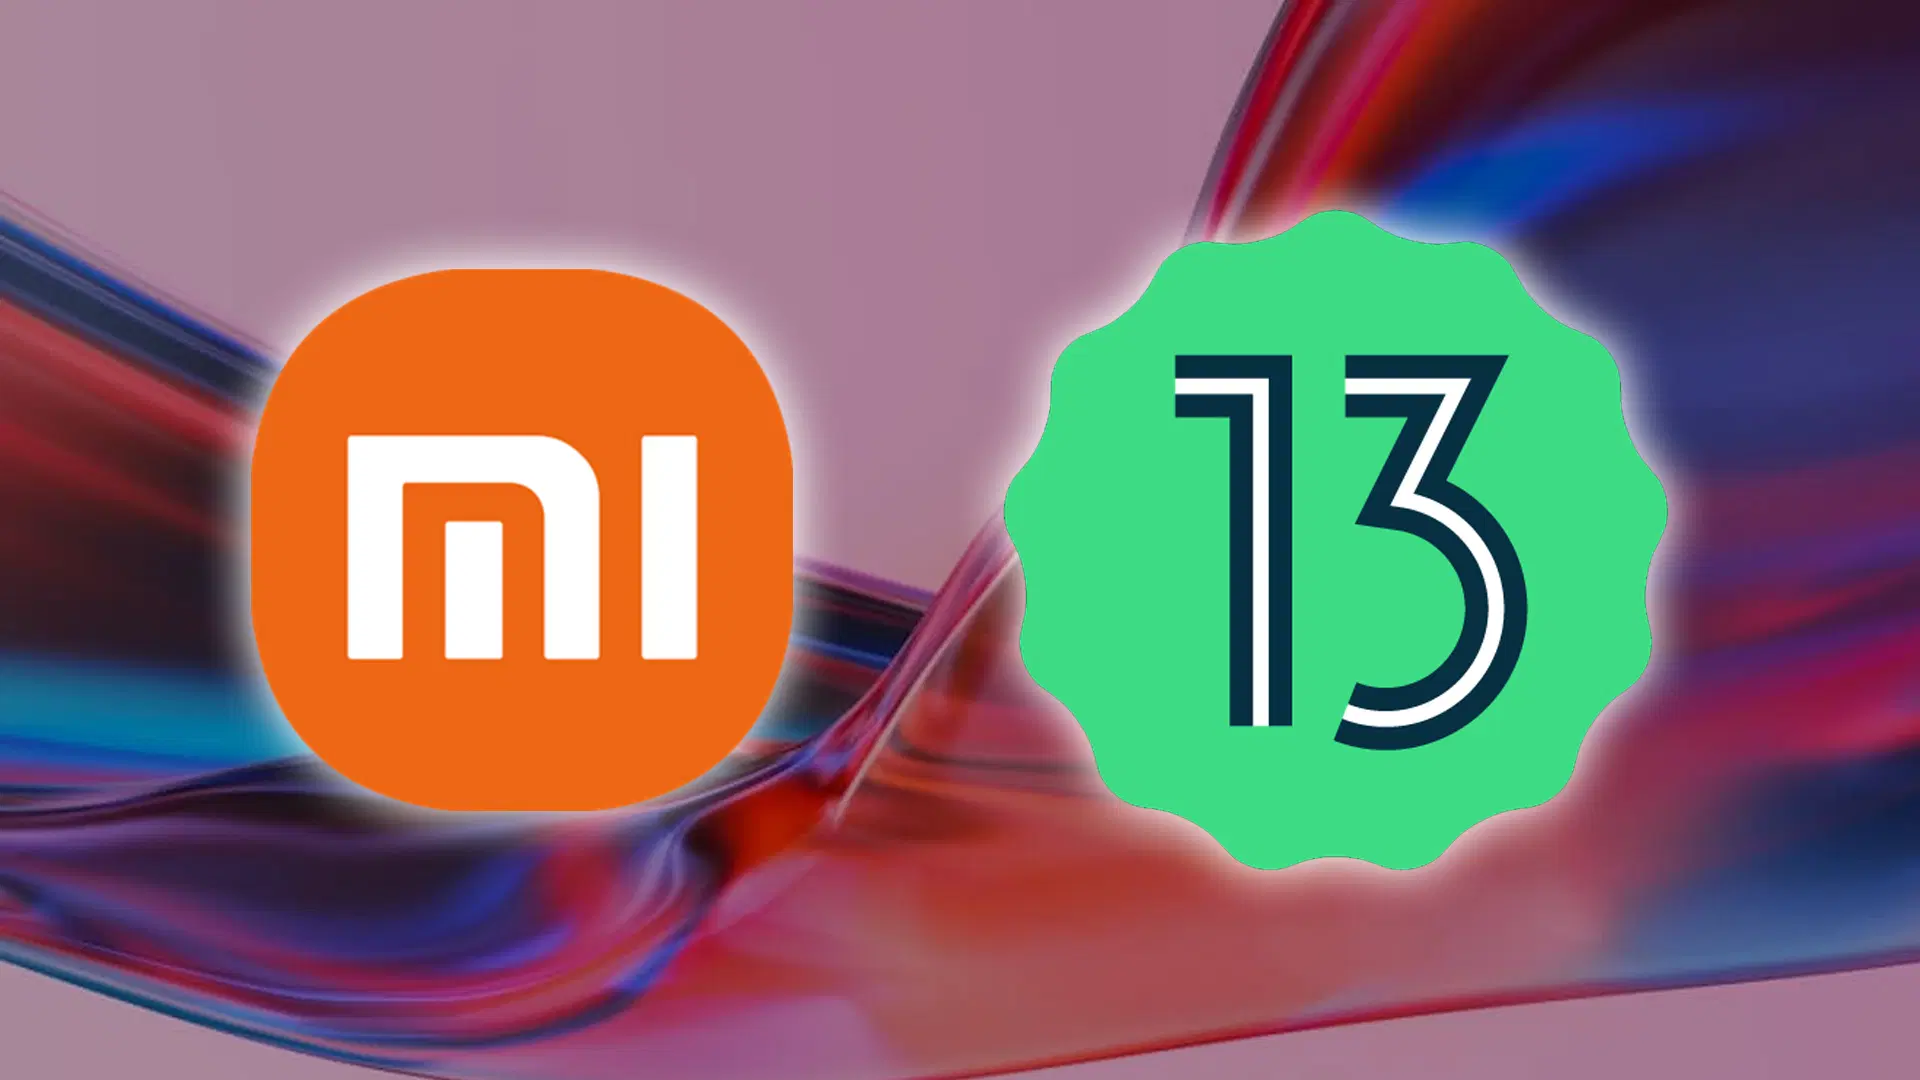 Xiaomi began testing MIUI 13 firmware on Android 13 – the update is available for four smartphones